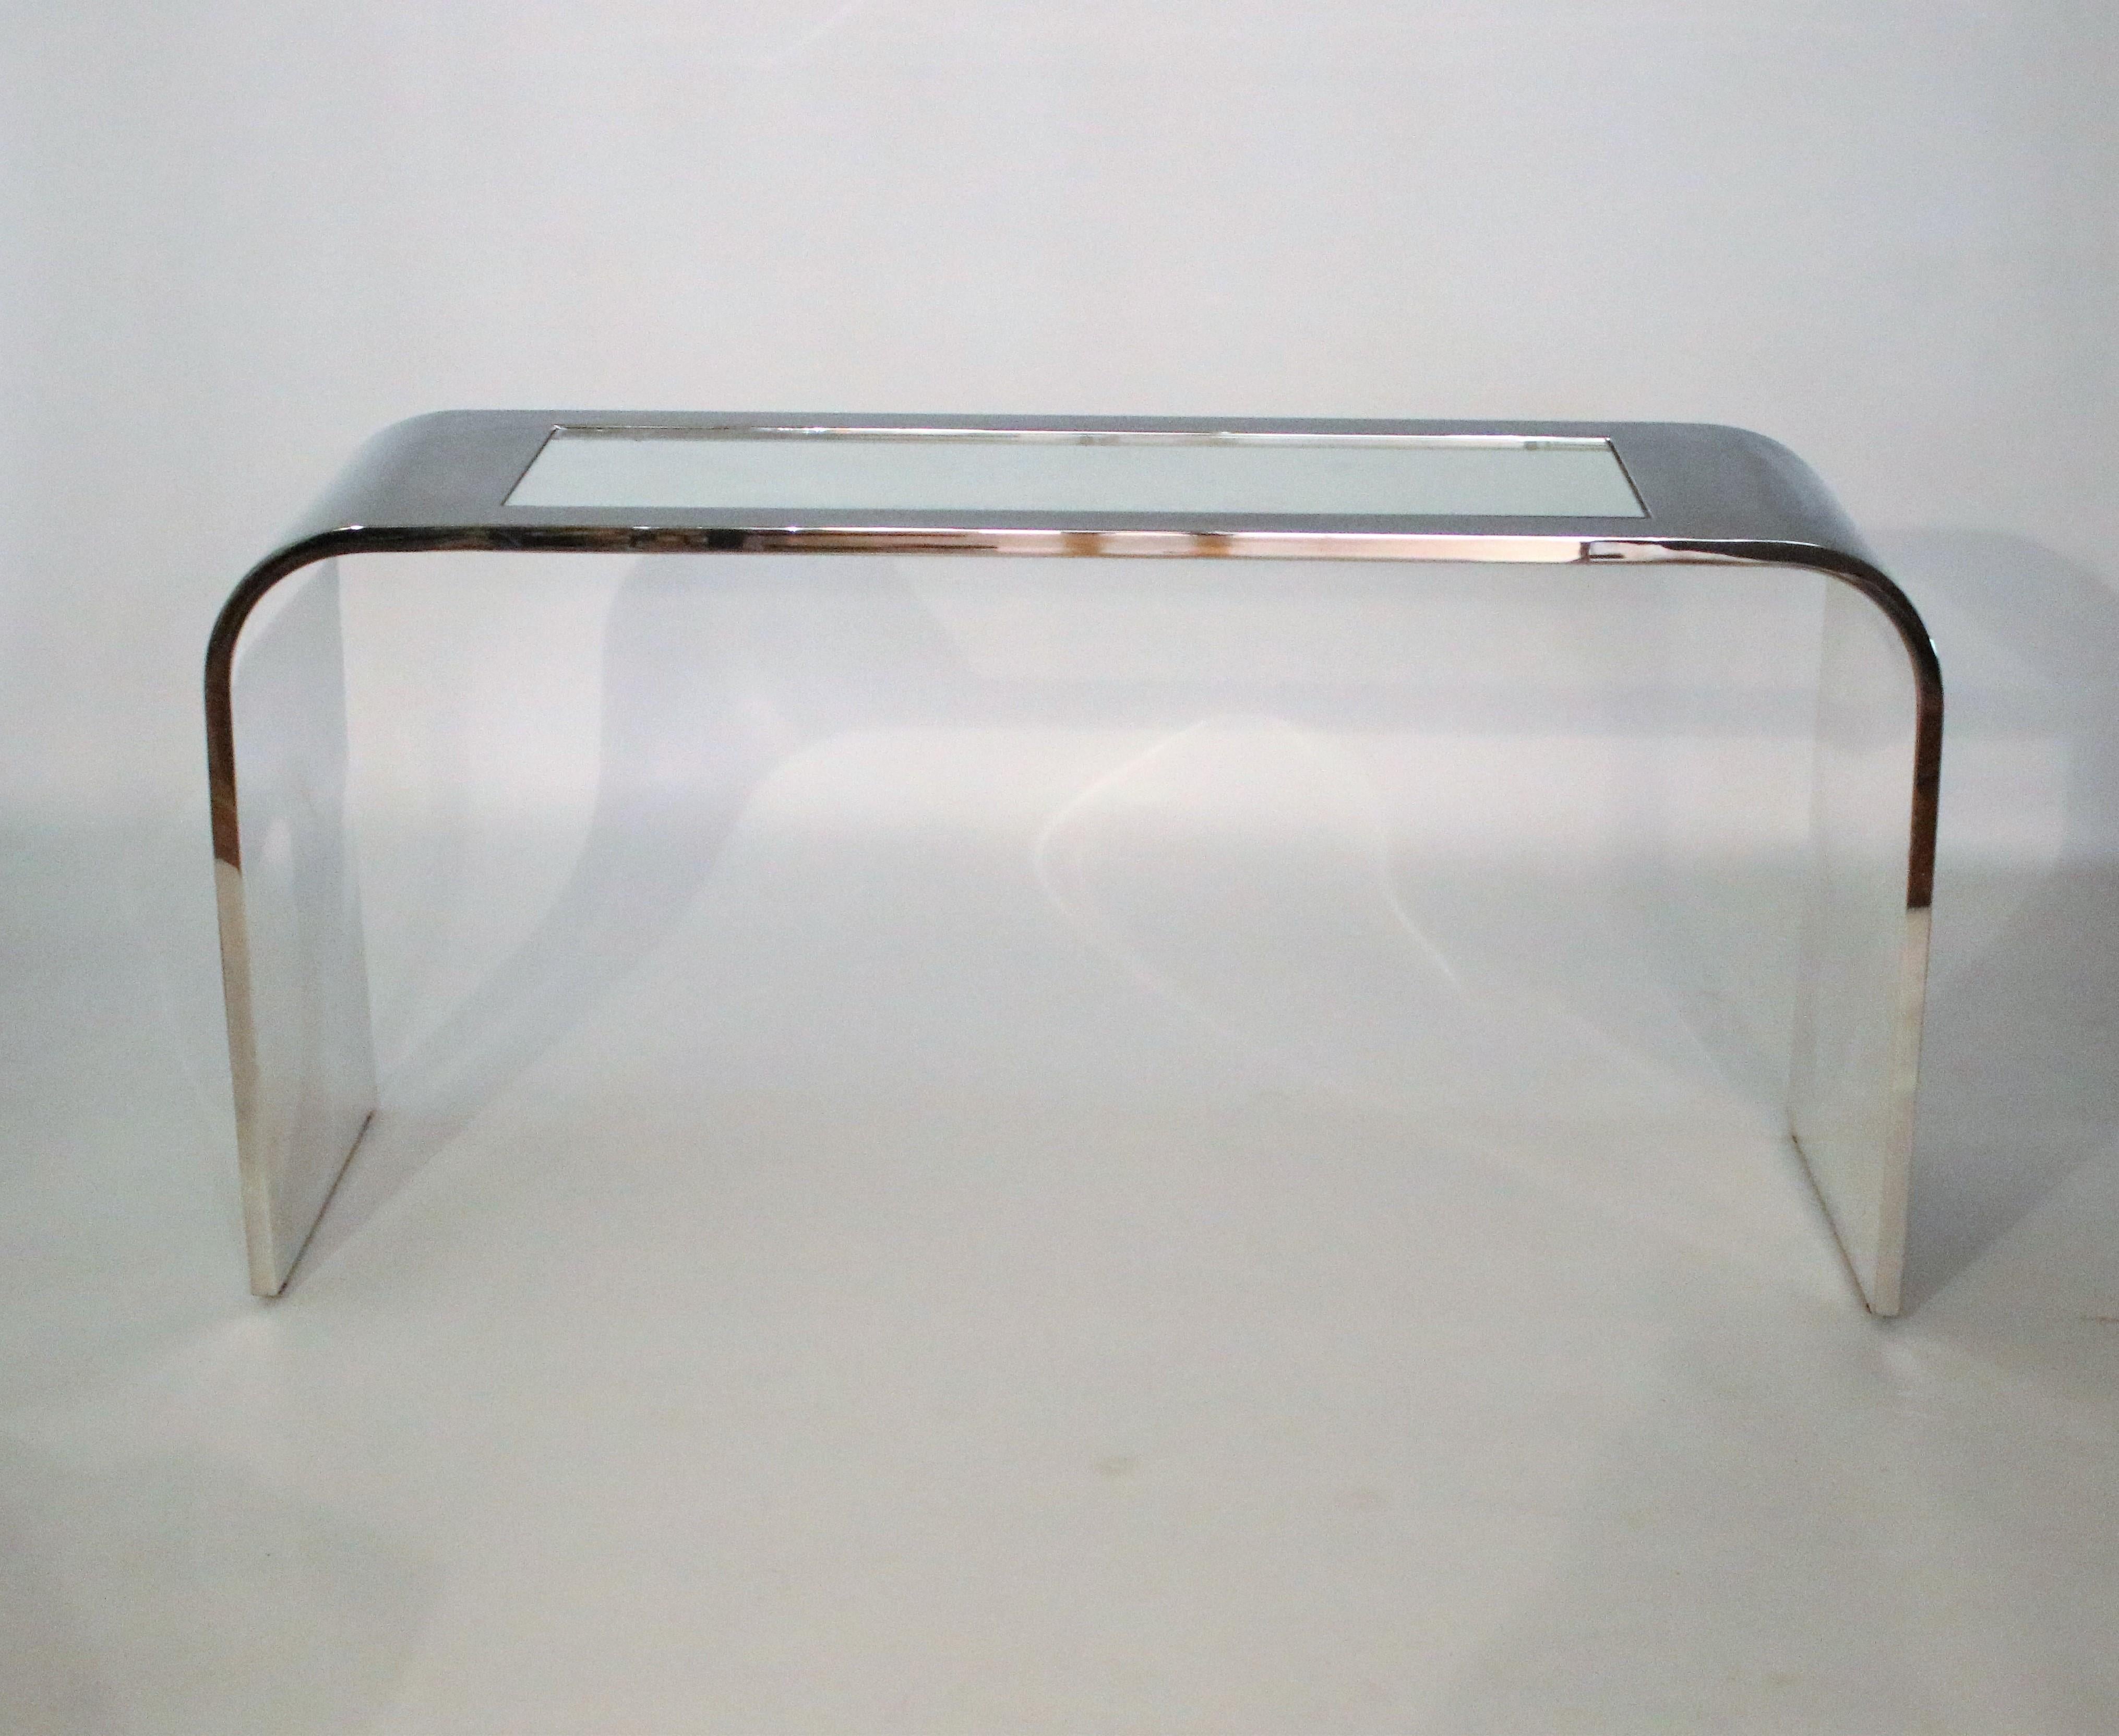 1970s polished mirrored stainless steel waterfall console table with glass inset designed by Stanley Jay Friedman for Brueton. Raised on adjustable steel glides.
 